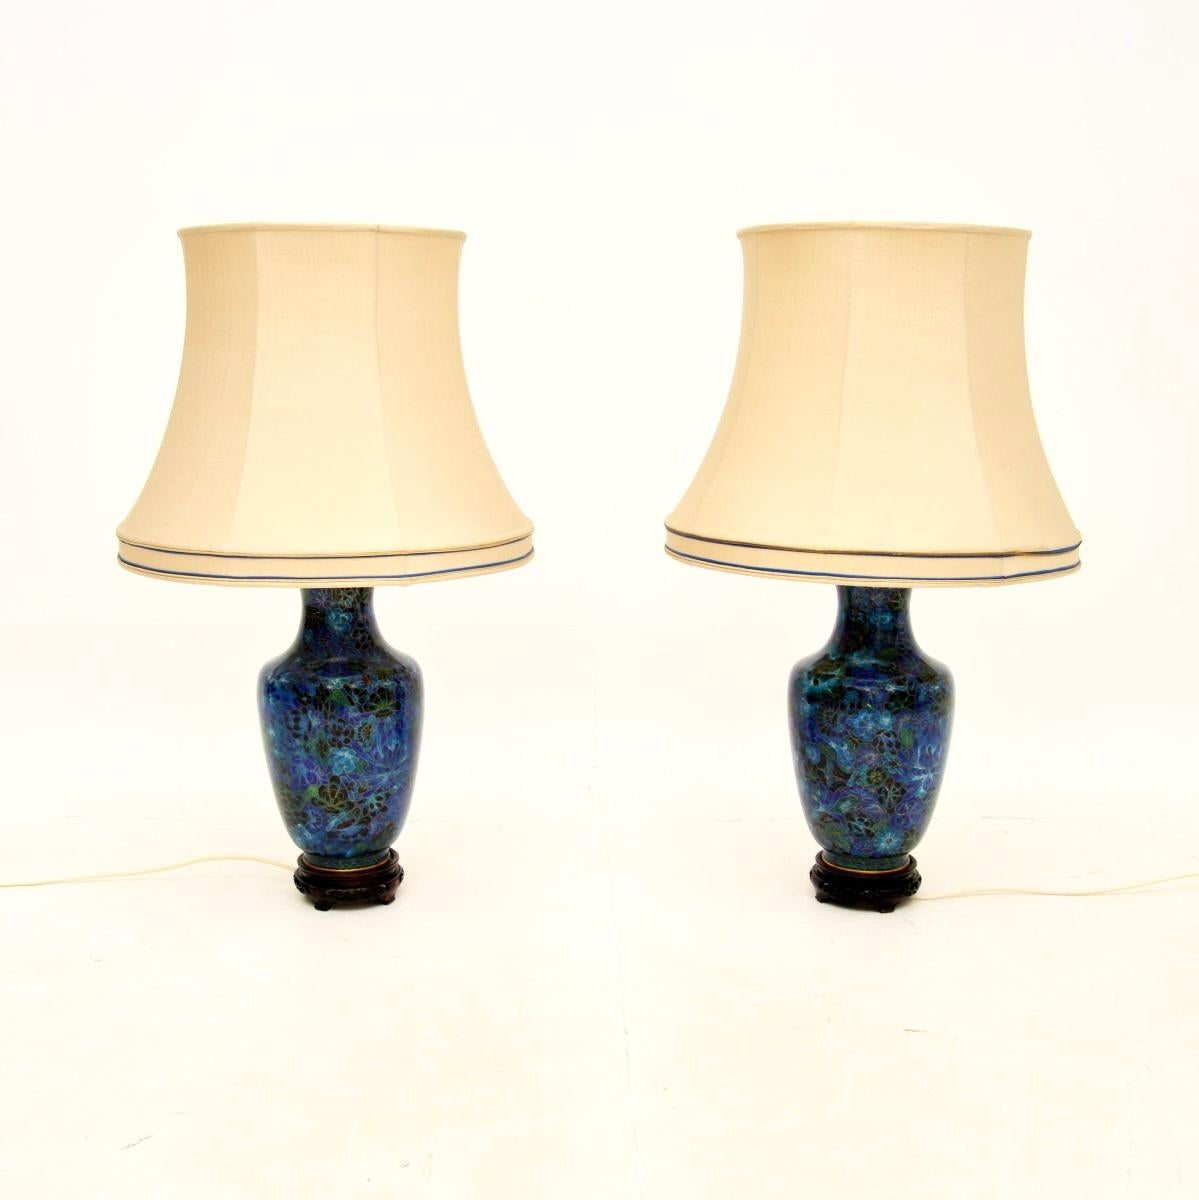 An absolutely stunning pair of antique cloisonné table lamps. They were made in France, and date from around the 1950’s.

The quality is outstanding, they are a very large and impressive size. The enameled cloisonné work is beautifully executed,